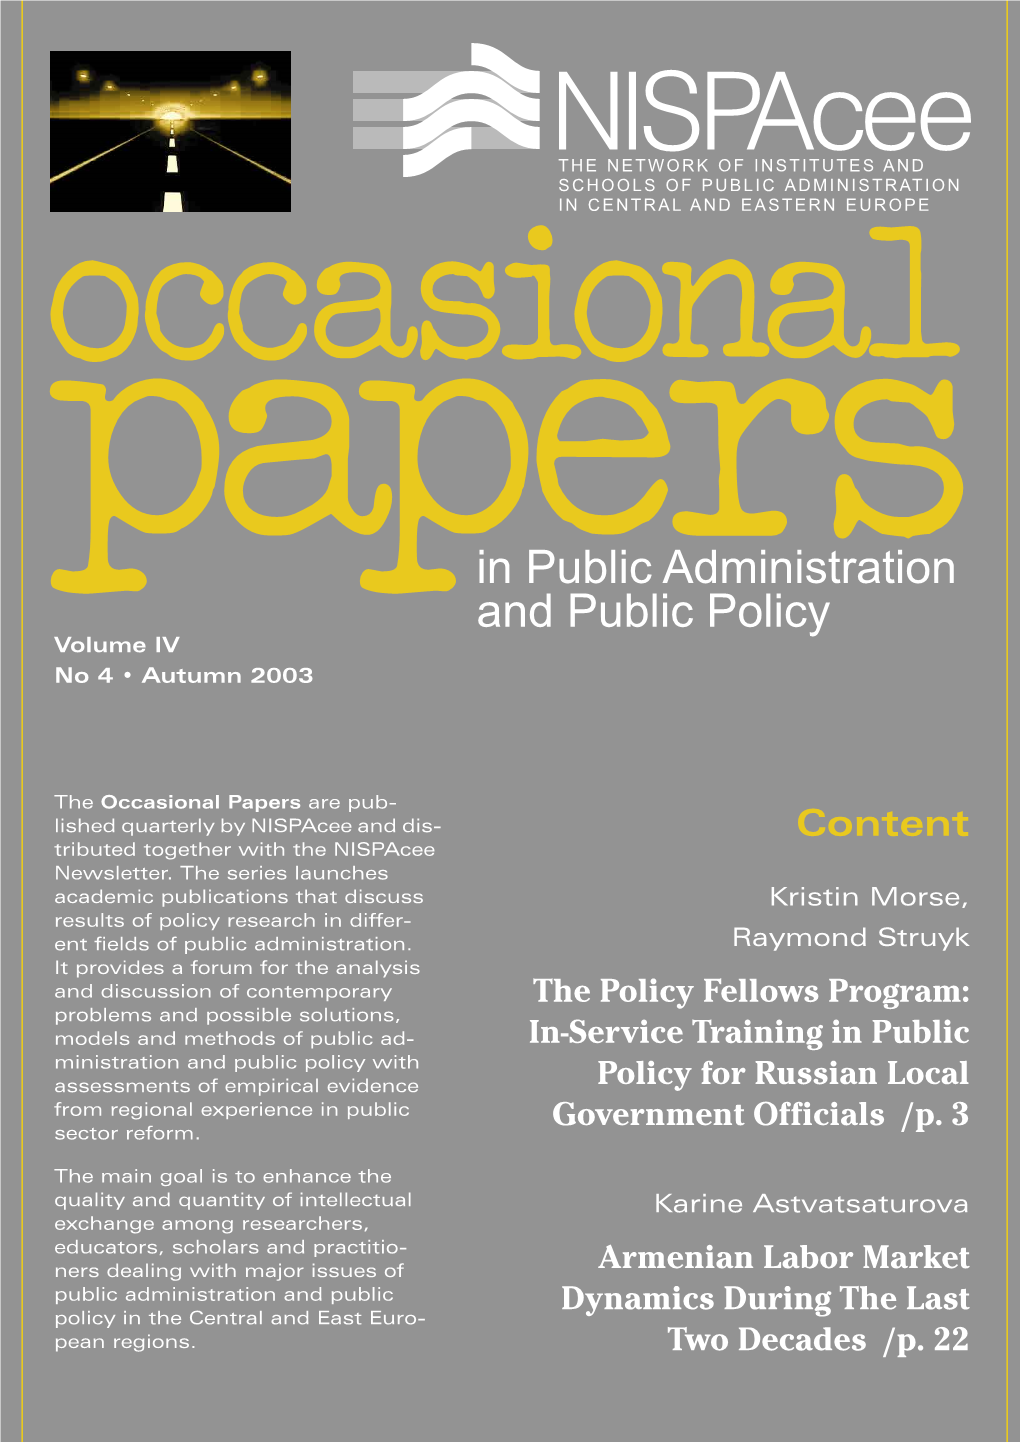 The Policy Fellows Program